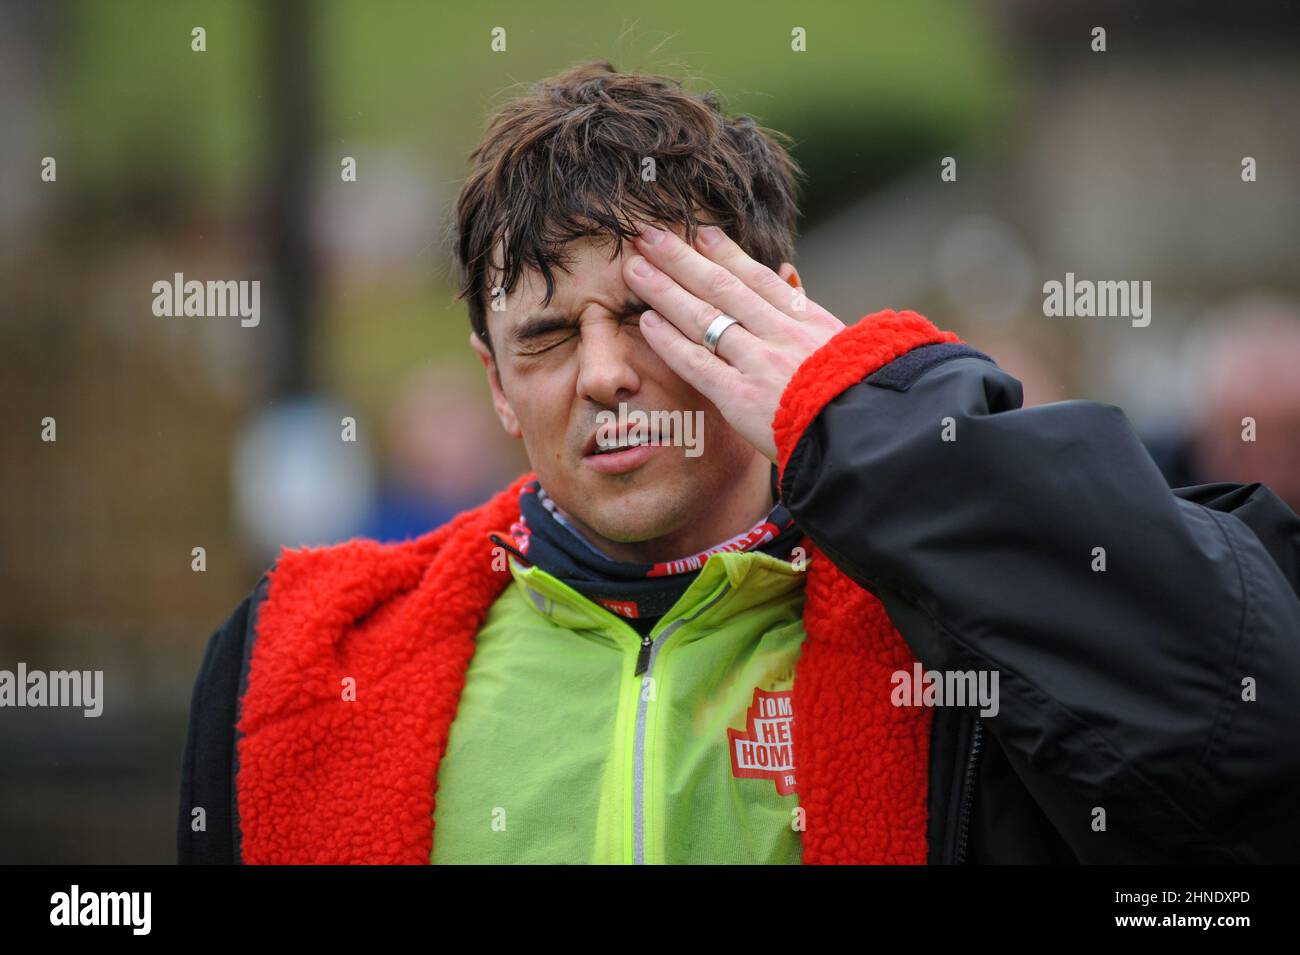 Winterbourne Abbas, Dorset, UK. 16th February 2022. Olympic gold medalists Tom  Daley feels the strain after 7 hours of riding on day 3 of his Comic Relief  Hell of a Homecoming Challenge